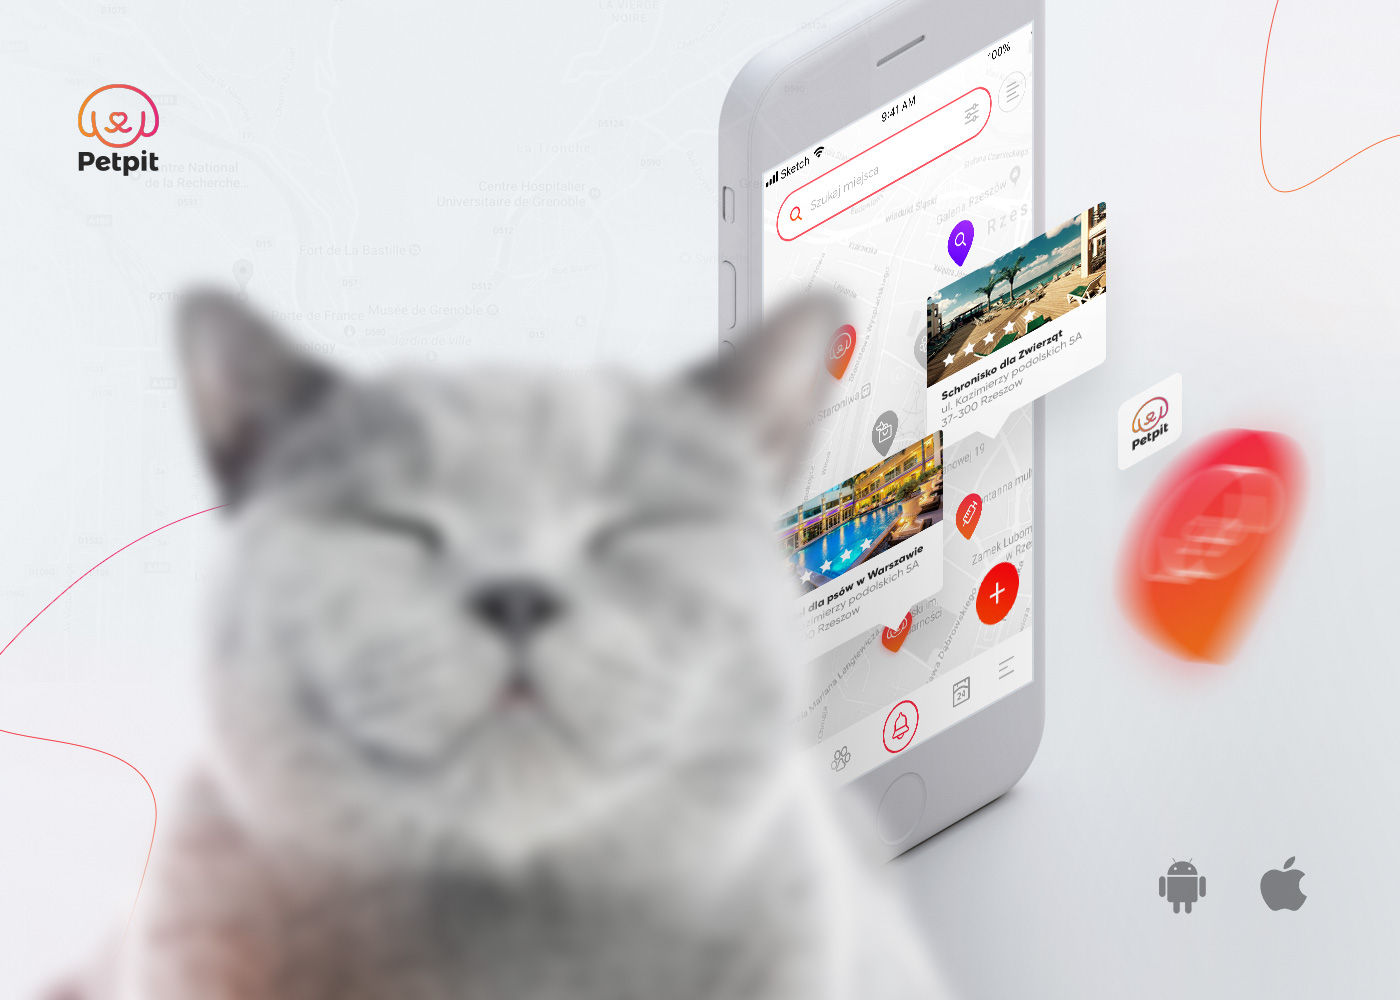 Petpit App – App Store / Android Market